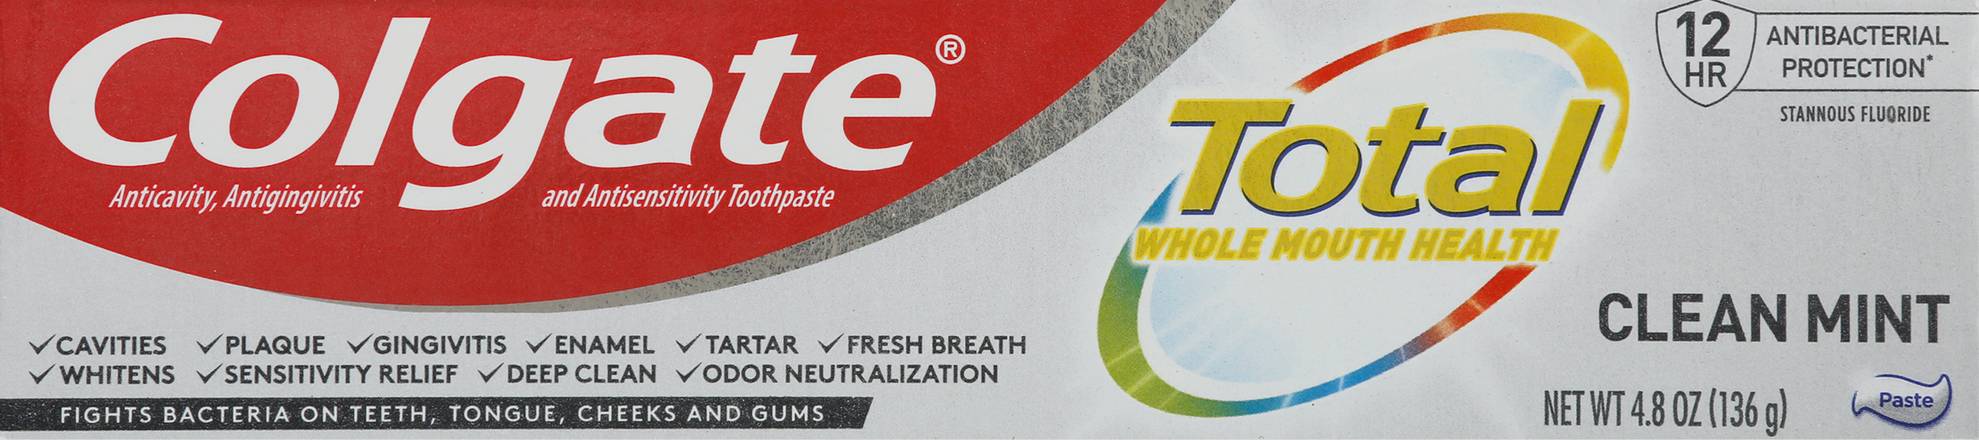 Colgate Clean Mint Toothpaste